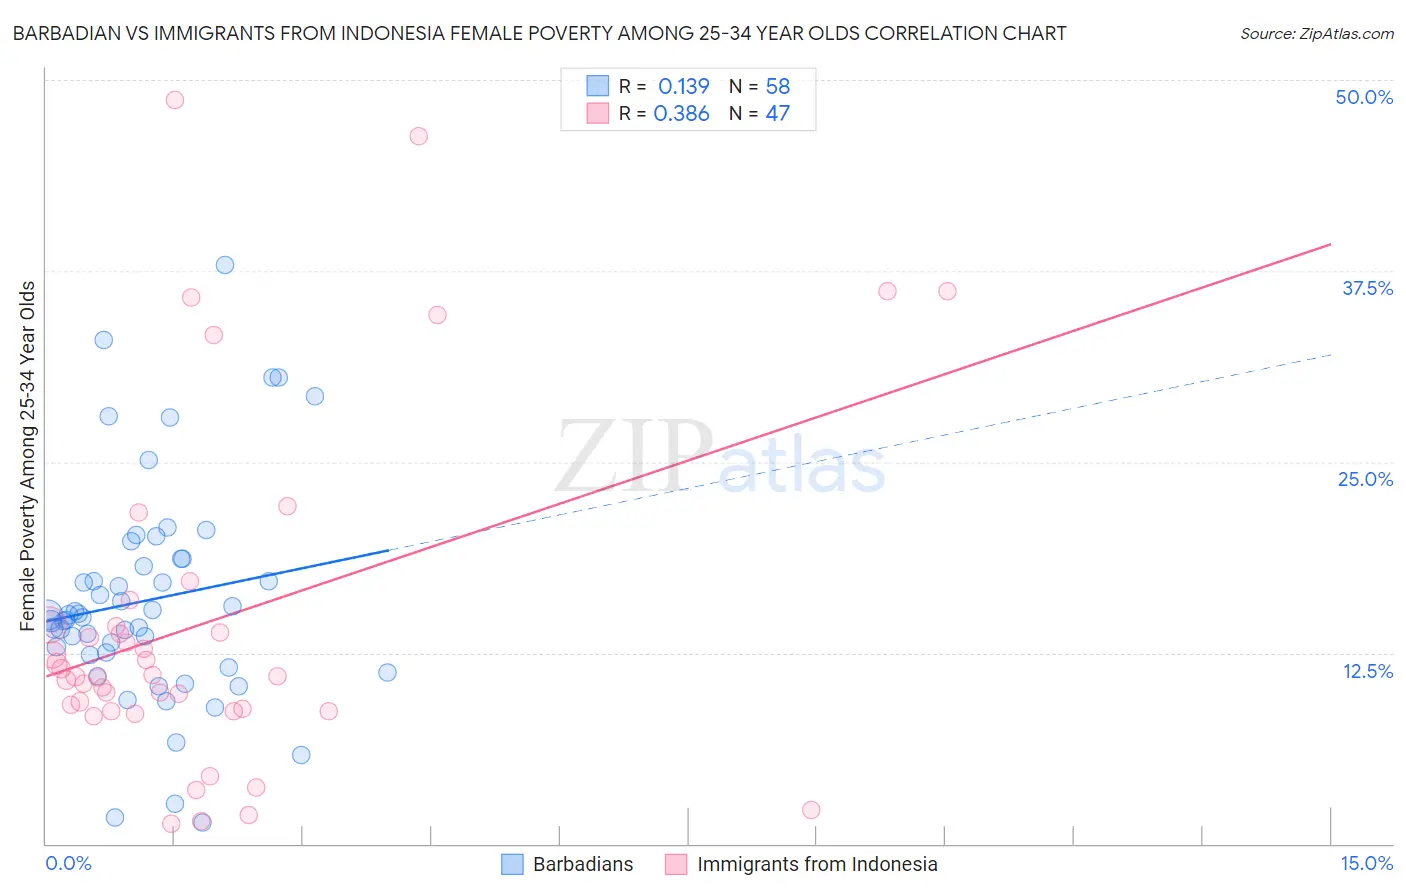 Barbadian vs Immigrants from Indonesia Female Poverty Among 25-34 Year Olds